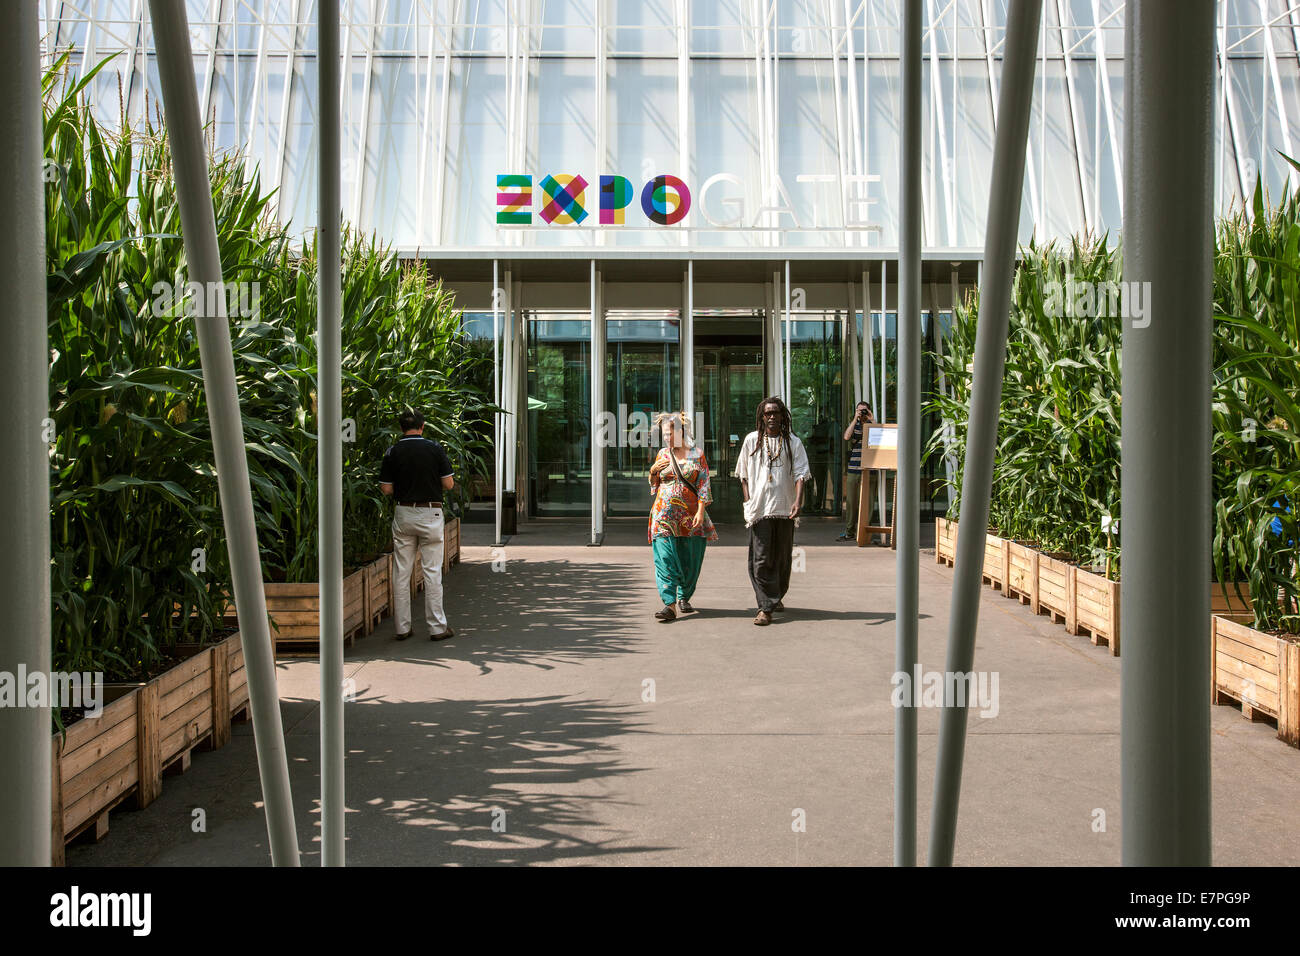 Milan, Expo 2015, EXPOGATE, entrance, Fair Universal, Exposition, gate, infopoint, corn flower beds, people, Lombardy, Italy Stock Photo